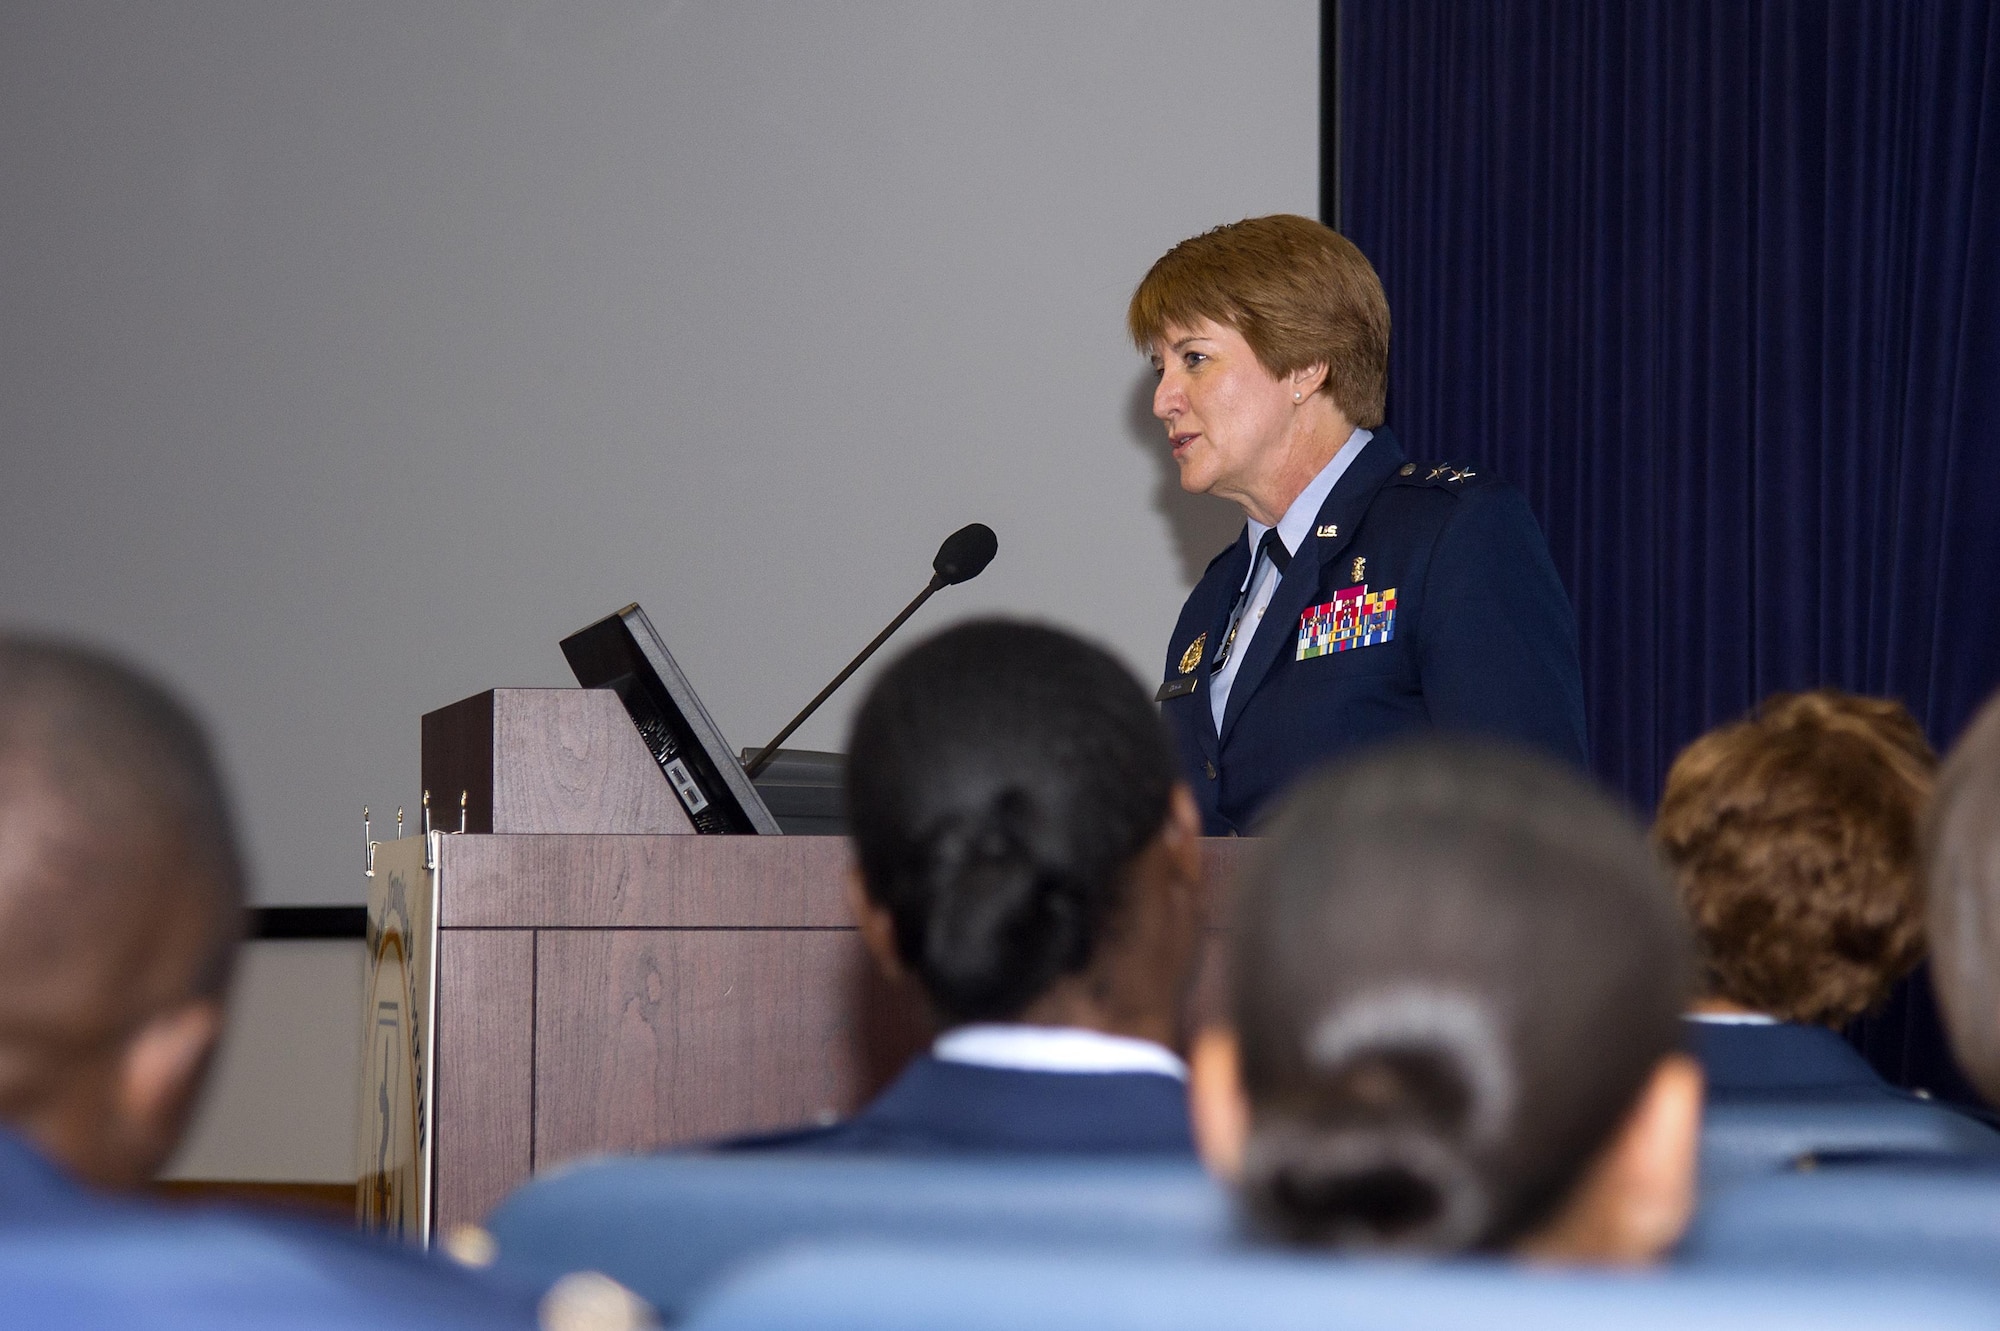 U.S. Air Force Major General Dorothy Hogg, the Deputy Surgeon General and Chief of the Air Force Nurse Corps, Office of the Surgeon General, Headquarters U.S. Air Force, Washington, D.C., speaks at the graduation ceremony of the Nurse Transitioning Program held at the Tampa General Hospital Nov. 29, 2017. During her speech, Hogg challenged the Airmen to provide evidence-based care to their patients, as well as to continue learning industry best practices